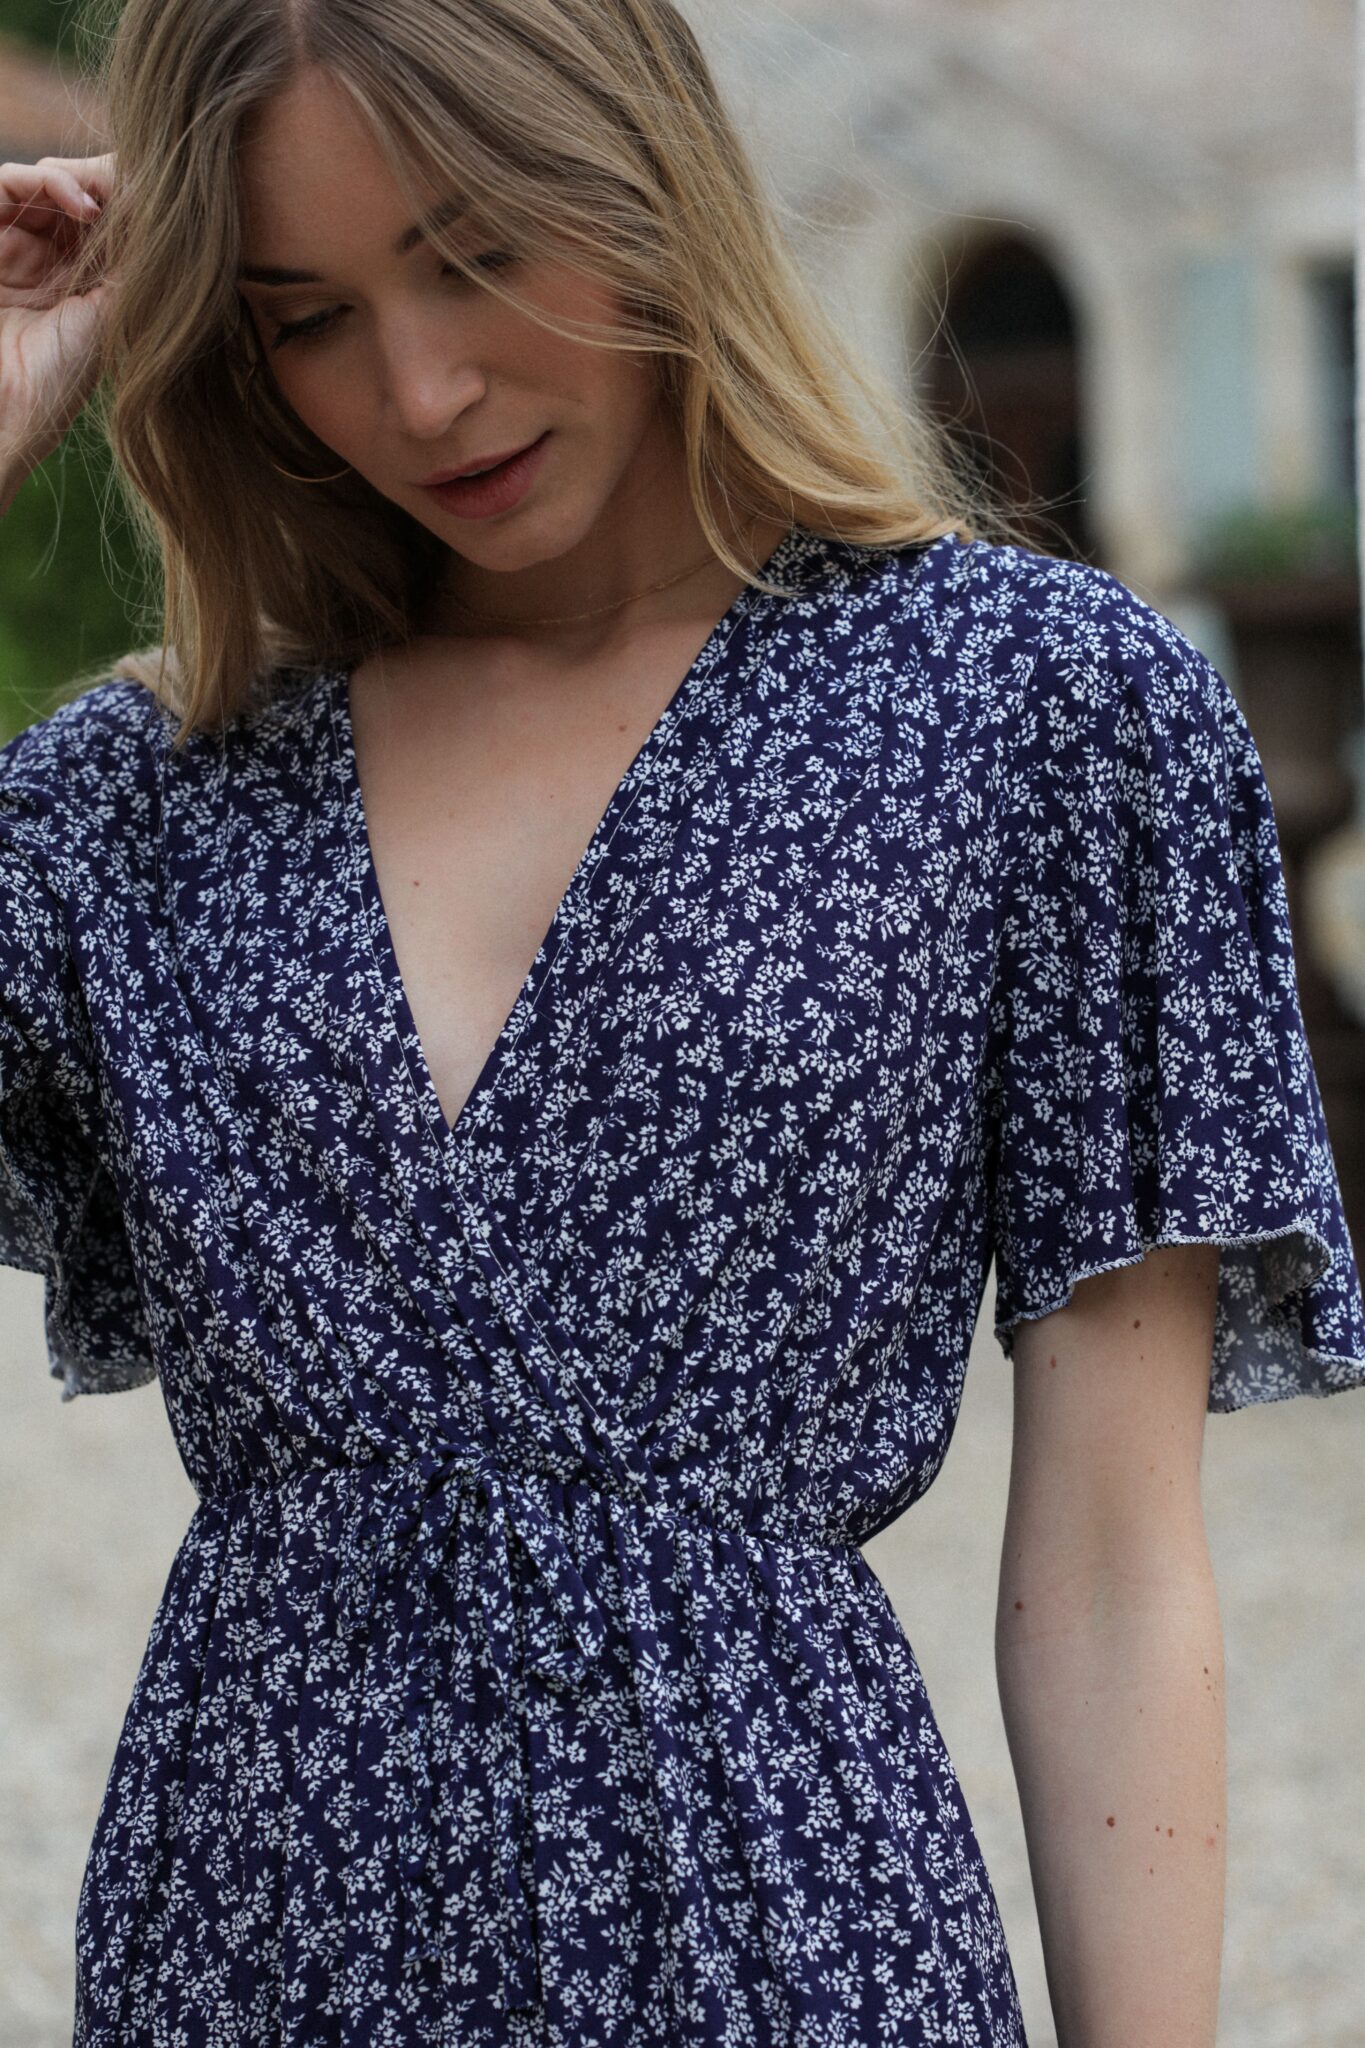 two-tone navy floral dress zoomed